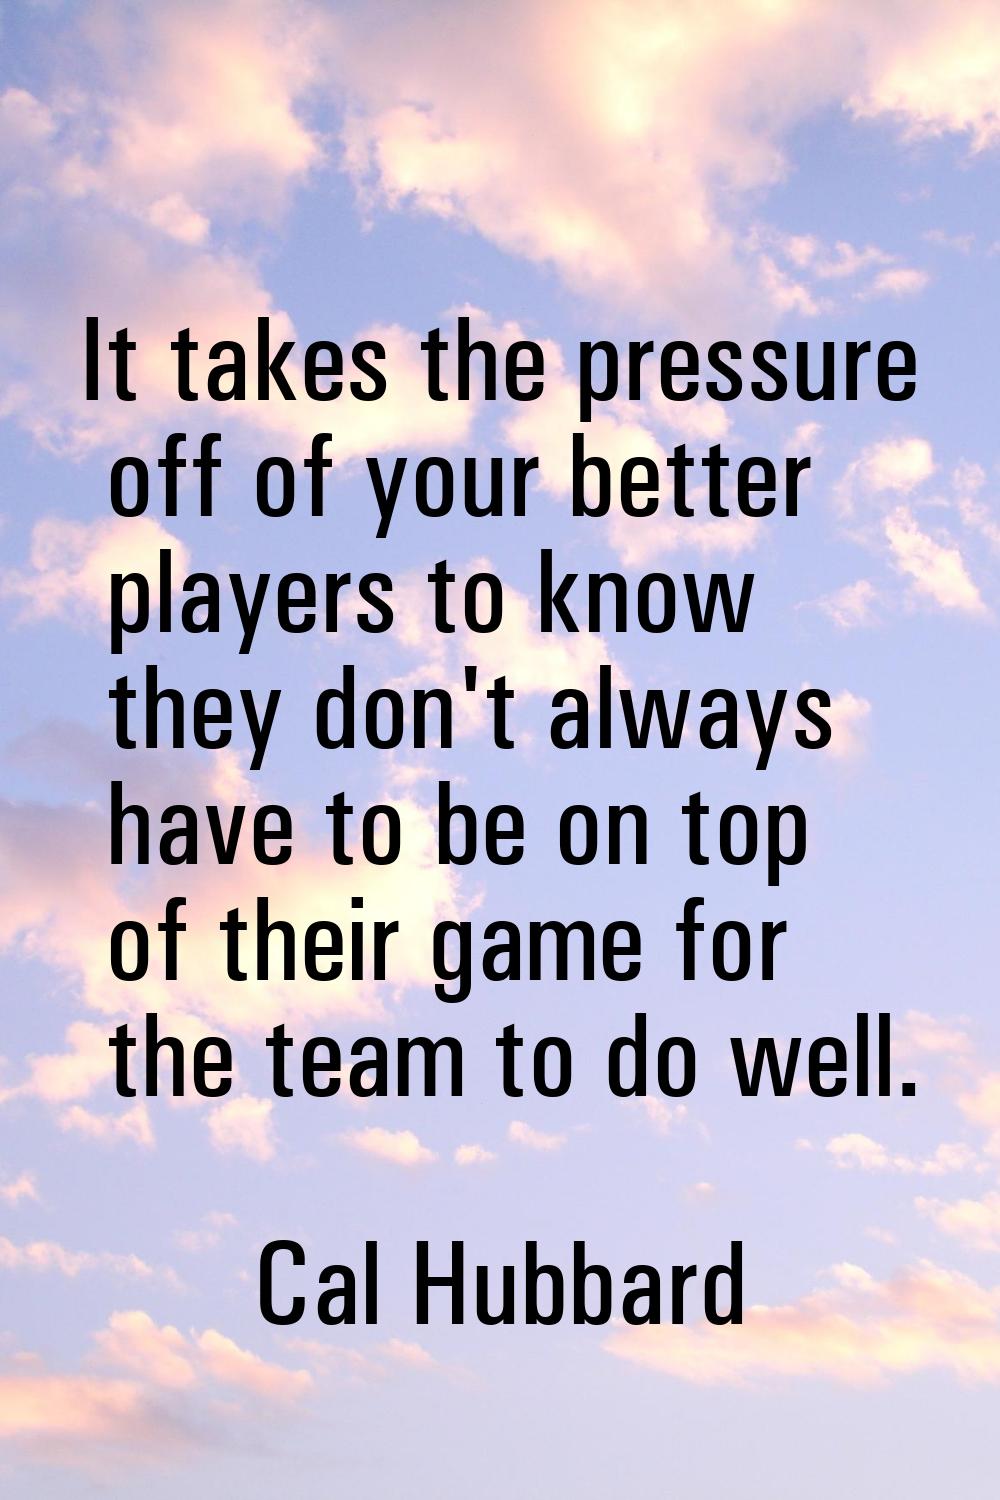 It takes the pressure off of your better players to know they don't always have to be on top of the